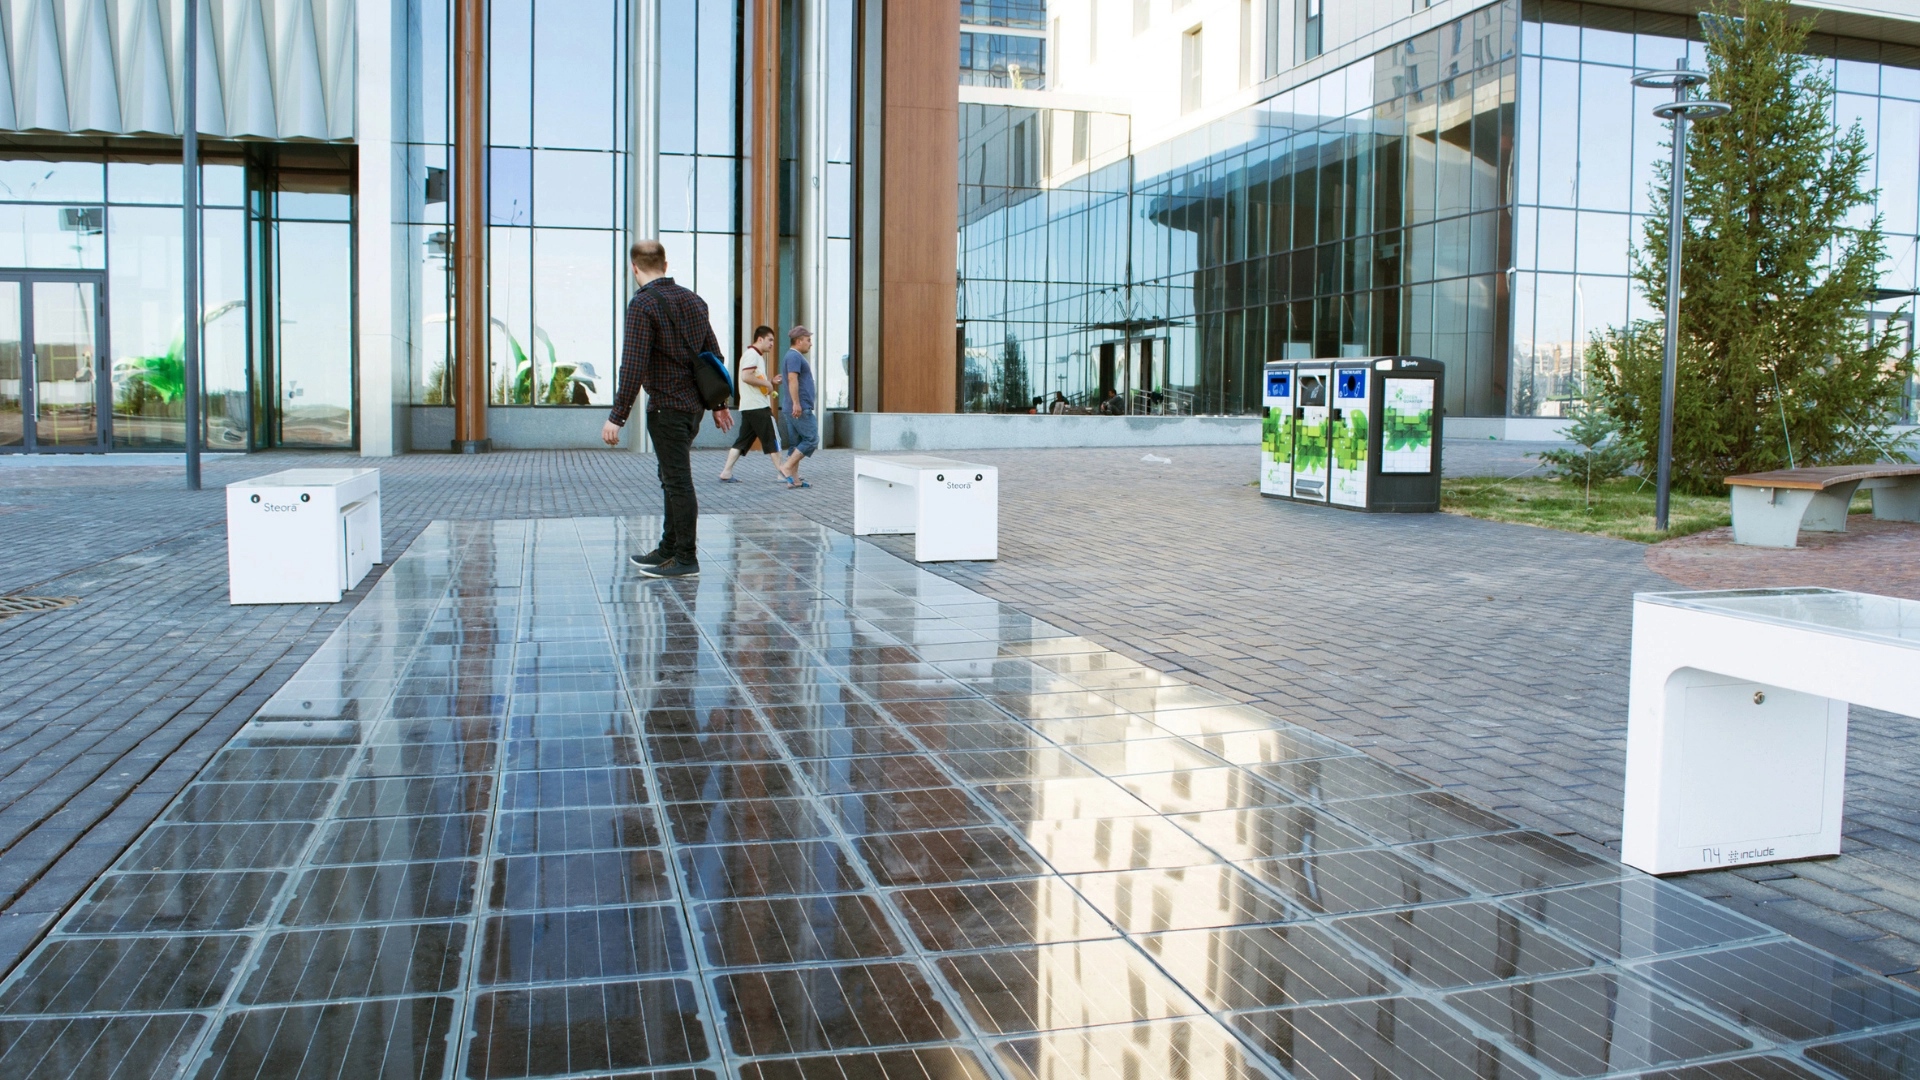 Platio says its solar panels can be placed on any floor and can power buildings and electronic devices to places where it was not possible before./Platio